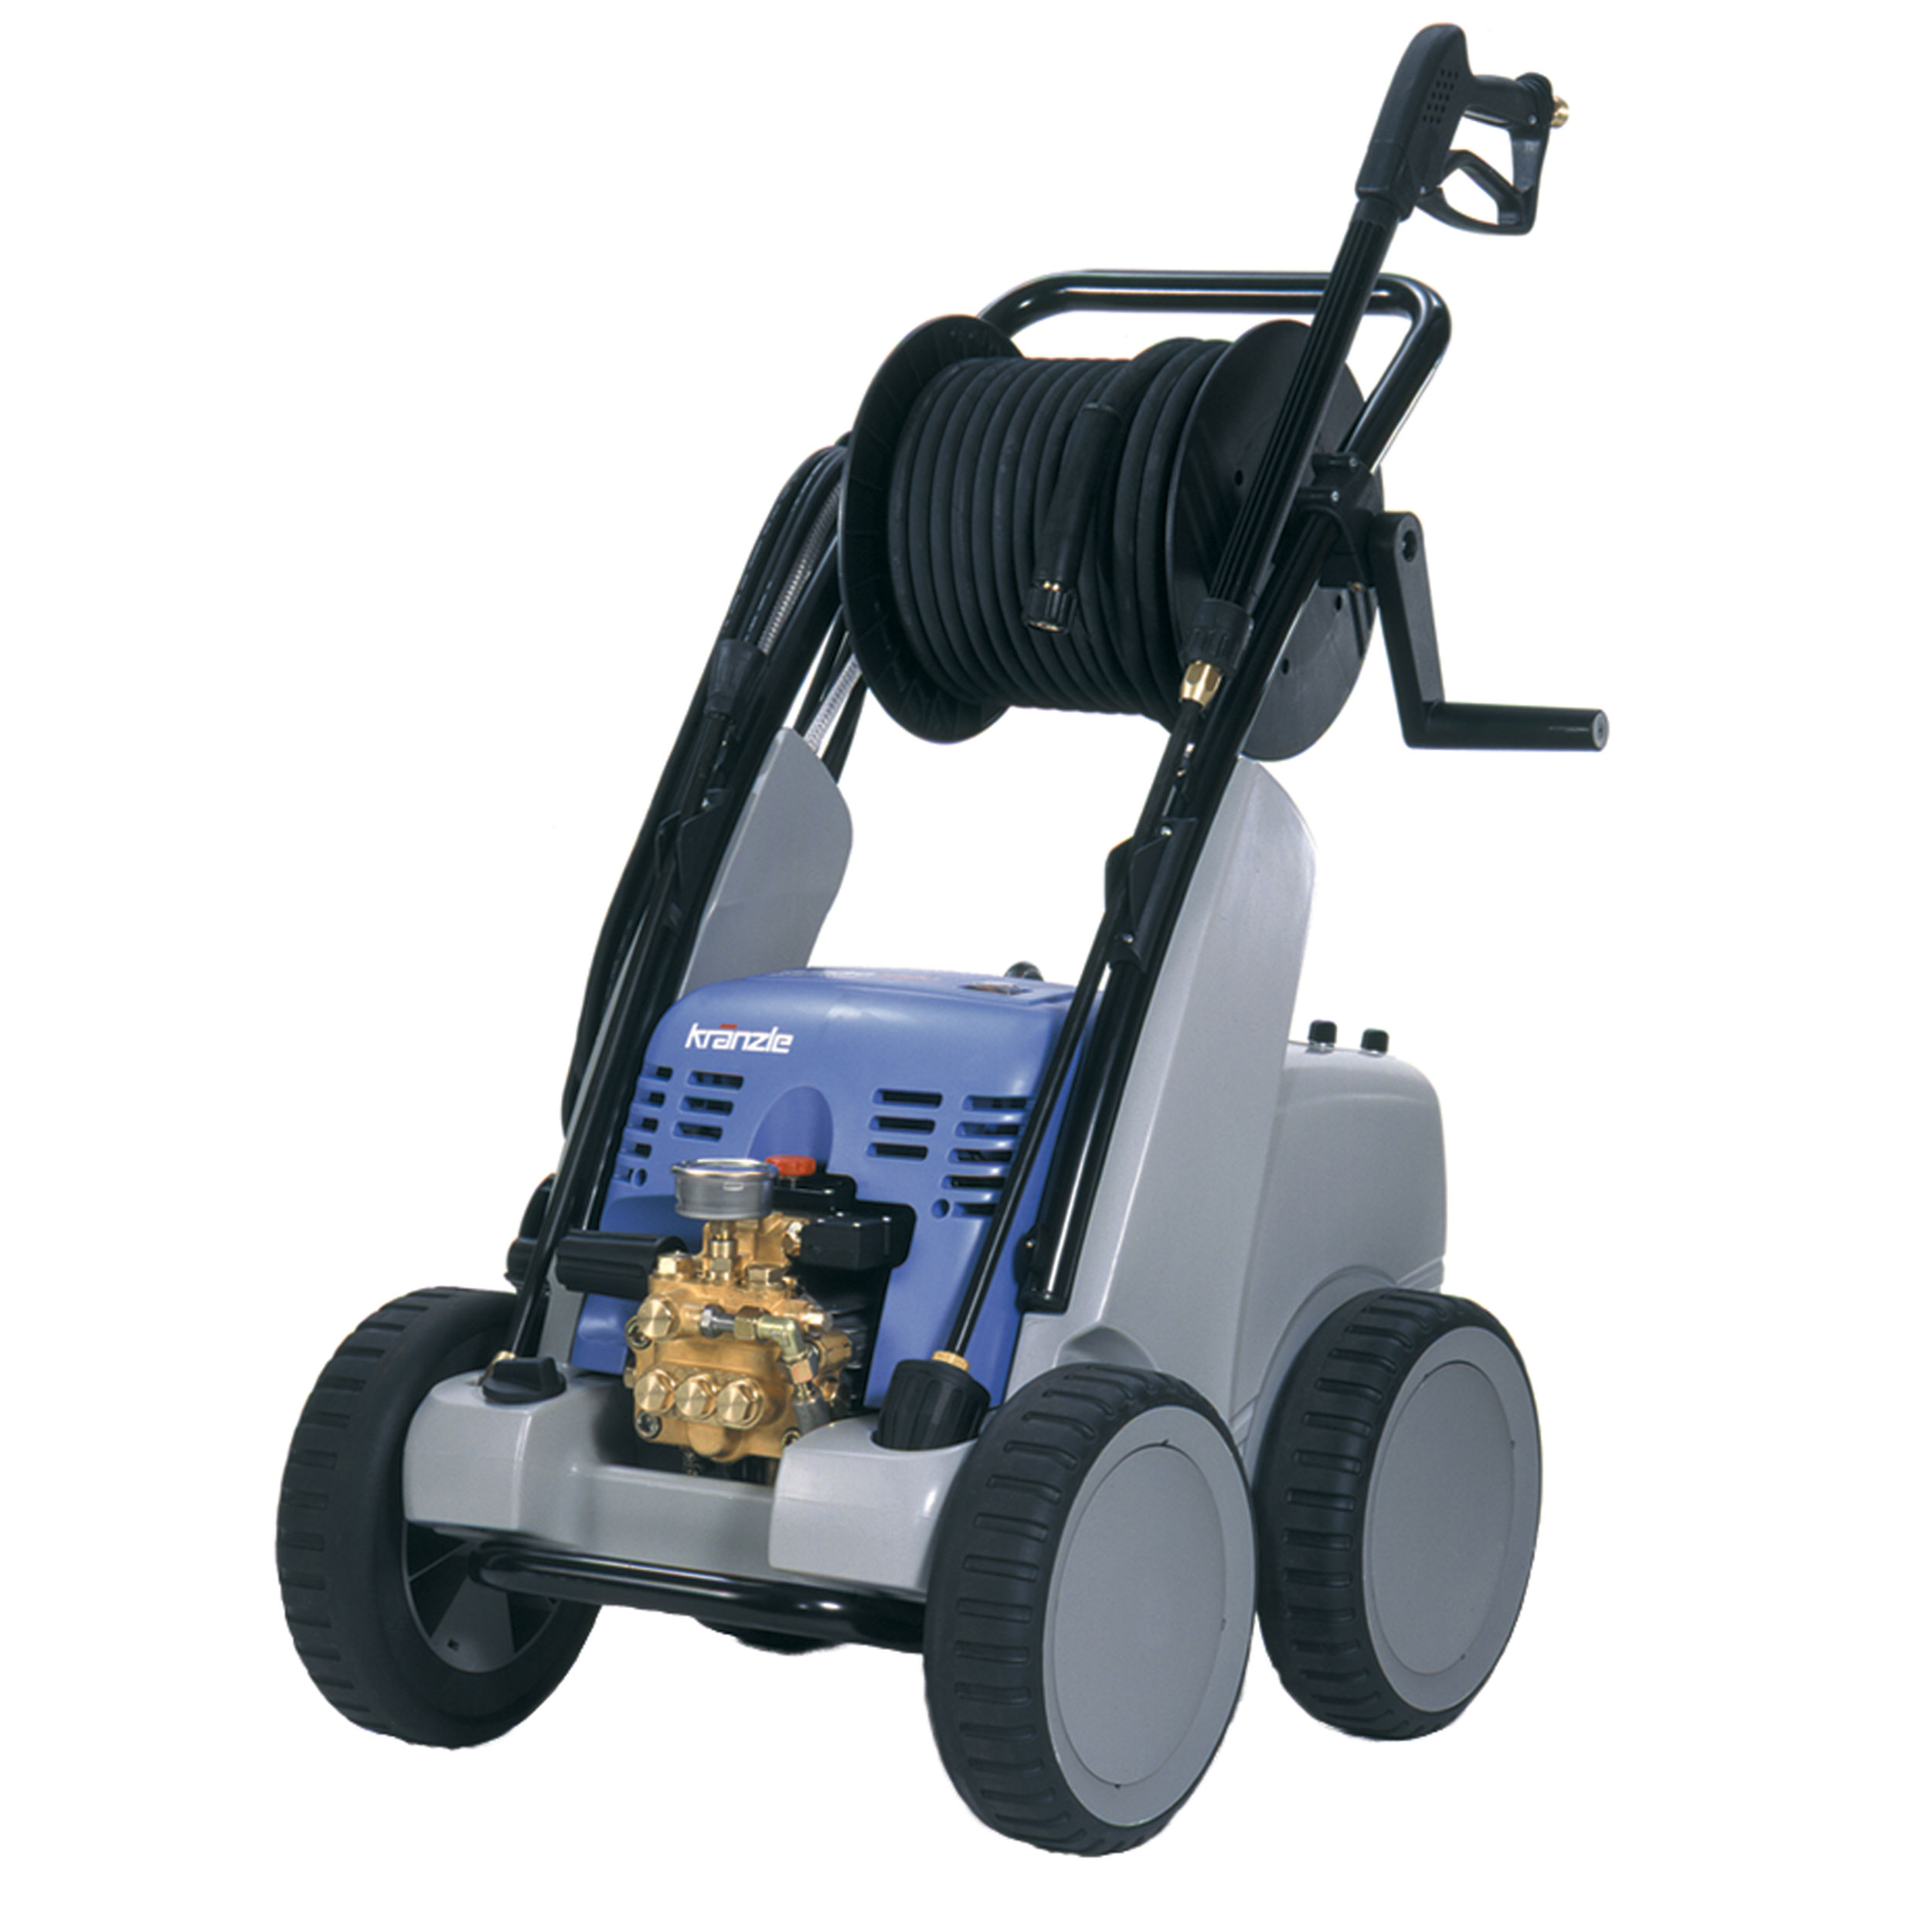 K700tst Pressure Washer, Cold Water, 220v, 25a, 1ph